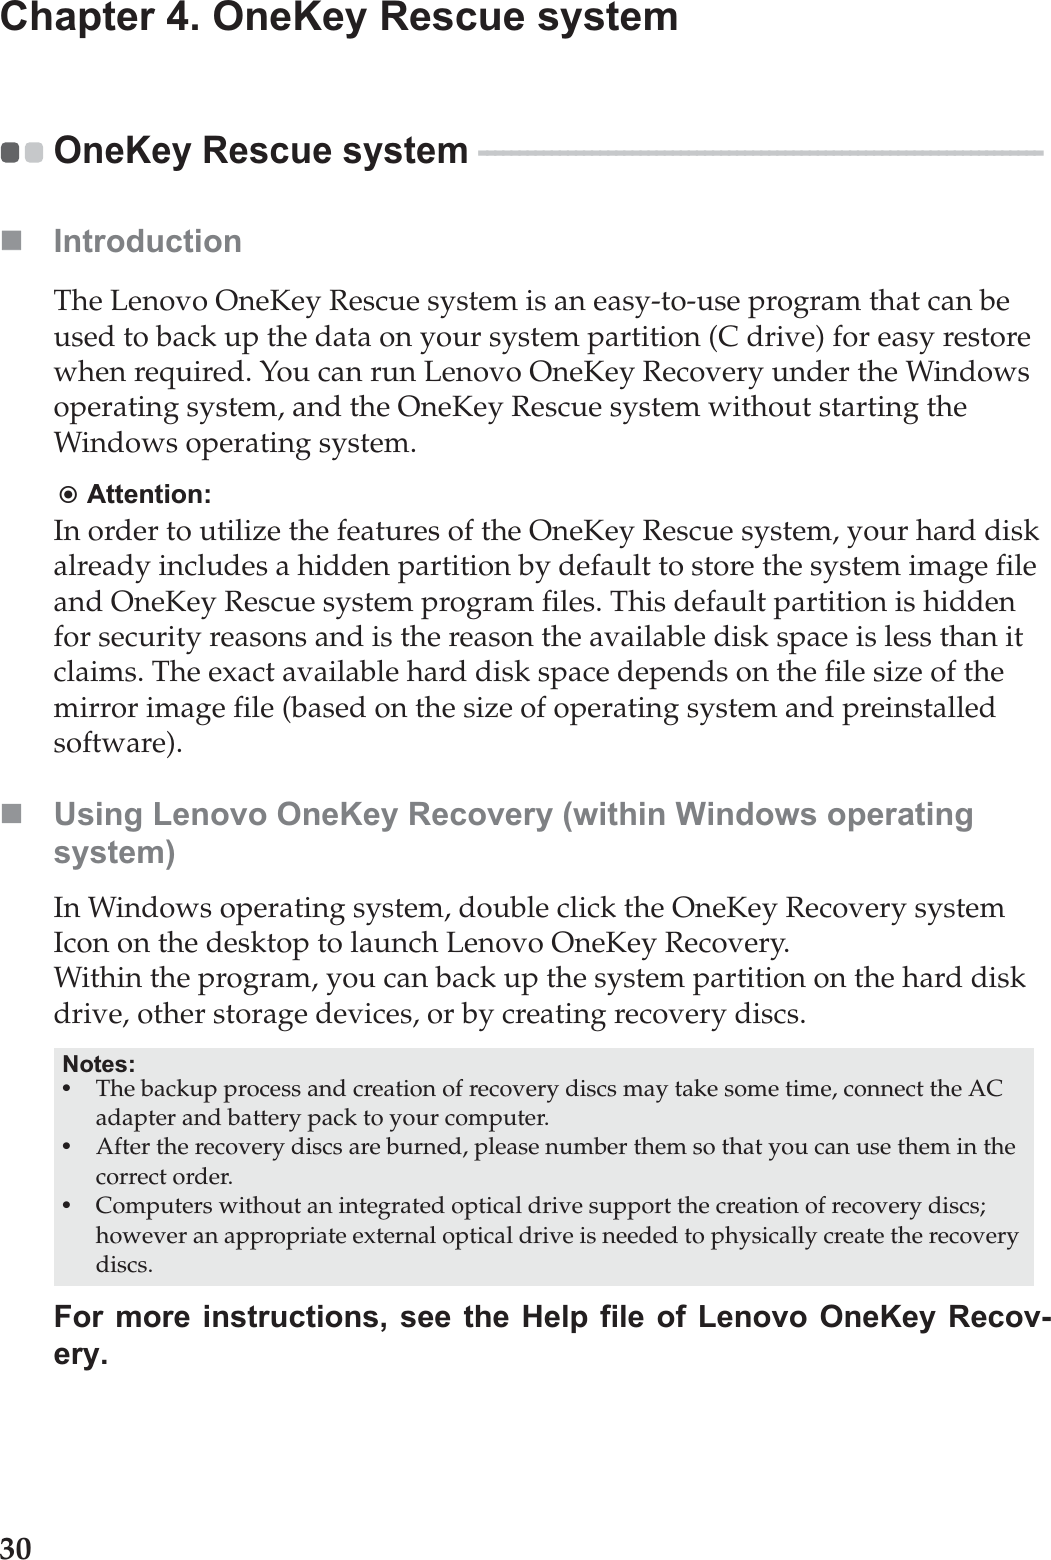 30Chapter 4. OneKey Rescue systemOneKey Rescue system  - - - - - - - - - - - - - - - - - - - - - - - - - - - - - - - - - - - - - - - - - - - - - - - - - - - - - - - - - - - - - - - - - - - - - - IntroductionThe Lenovo OneKey Rescue system is an easy-to-use program that can be used to back up the data on your system partition (C drive) for easy restore when required. You can run Lenovo OneKey Recovery under the Windows operating system, and the OneKey Rescue system without starting the Windows operating system.Attention:In order to utilize the features of the OneKey Rescue system, your hard disk already includes a hidden partition by default to store the system image file and OneKey Rescue system program files. This default partition is hidden for security reasons and is the reason the available disk space is less than it claims. The exact available hard disk space depends on the file size of the mirror image file (based on the size of operating system and preinstalled software).Using Lenovo OneKey Recovery (within Windows operating system)In Windows operating system, double click the OneKey Recovery system Icon on the desktop to launch Lenovo OneKey Recovery. Within the program, you can back up the system partition on the hard disk drive, other storage devices, or by creating recovery discs. For more instructions, see the Help file of Lenovo OneKey Recov-ery.Notes:•The backup process and creation of recovery discs may take some time, connect the AC adapter and battery pack to your computer.•After the recovery discs are burned, please number them so that you can use them in the correct order.•Computers without an integrated optical drive support the creation of recovery discs; however an appropriate external optical drive is needed to physically create the recovery discs.